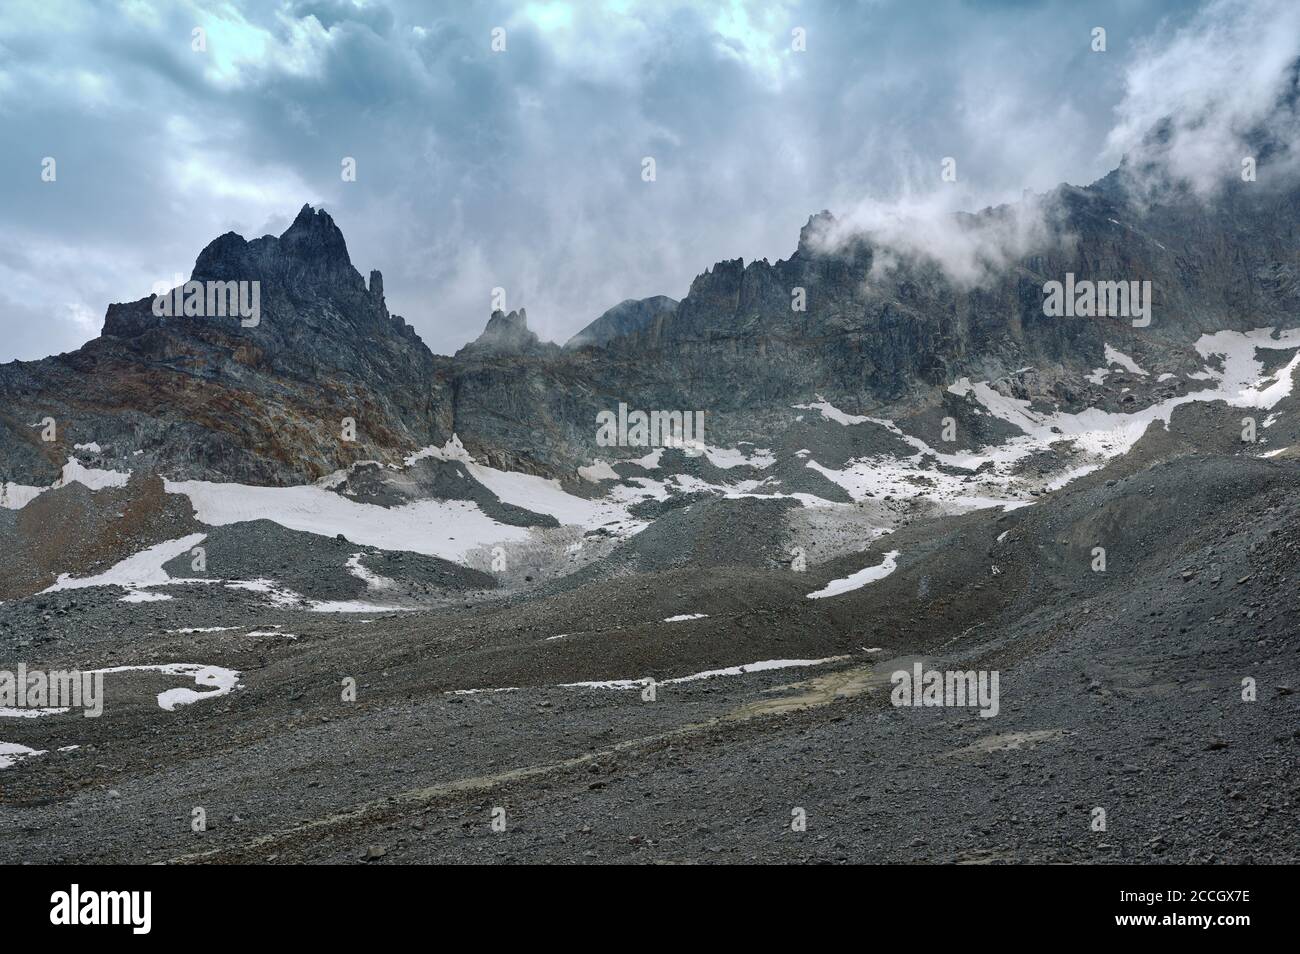 High mountain range landscape with rocky hills, white clouds and stone  valley. Lifeless wild nature. Wilderness ridge view Stock Photo - Alamy